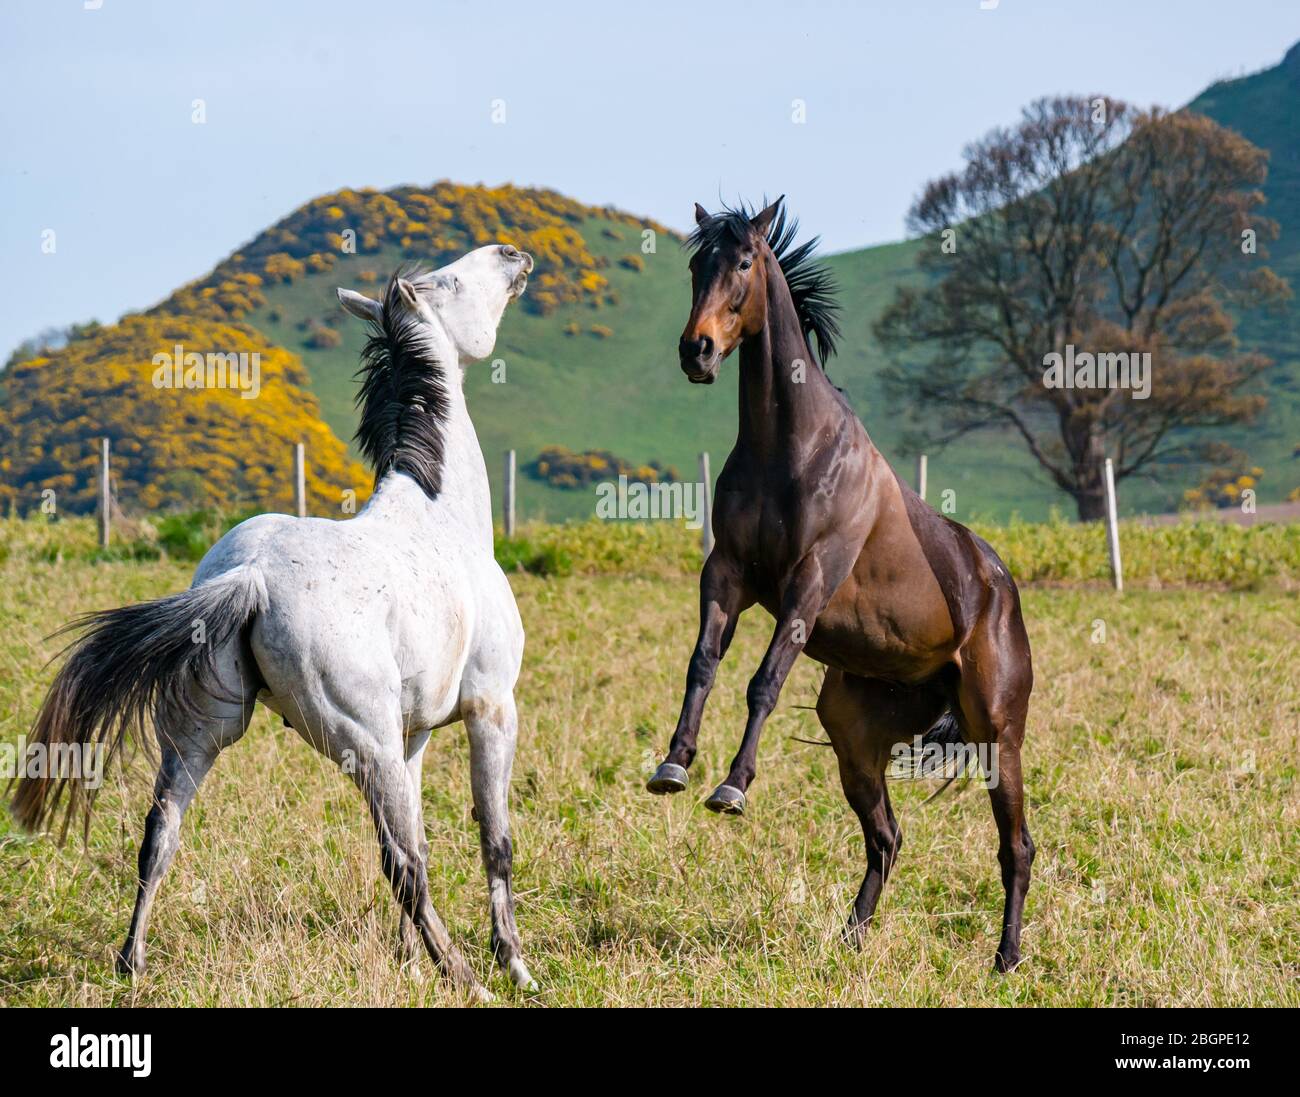 East Lothian, Scotland, United Kingdom, 22nd April 2020. UK Weather: A pair of horses are playful in the sunshine with one horse rearing up at the other Stock Photo